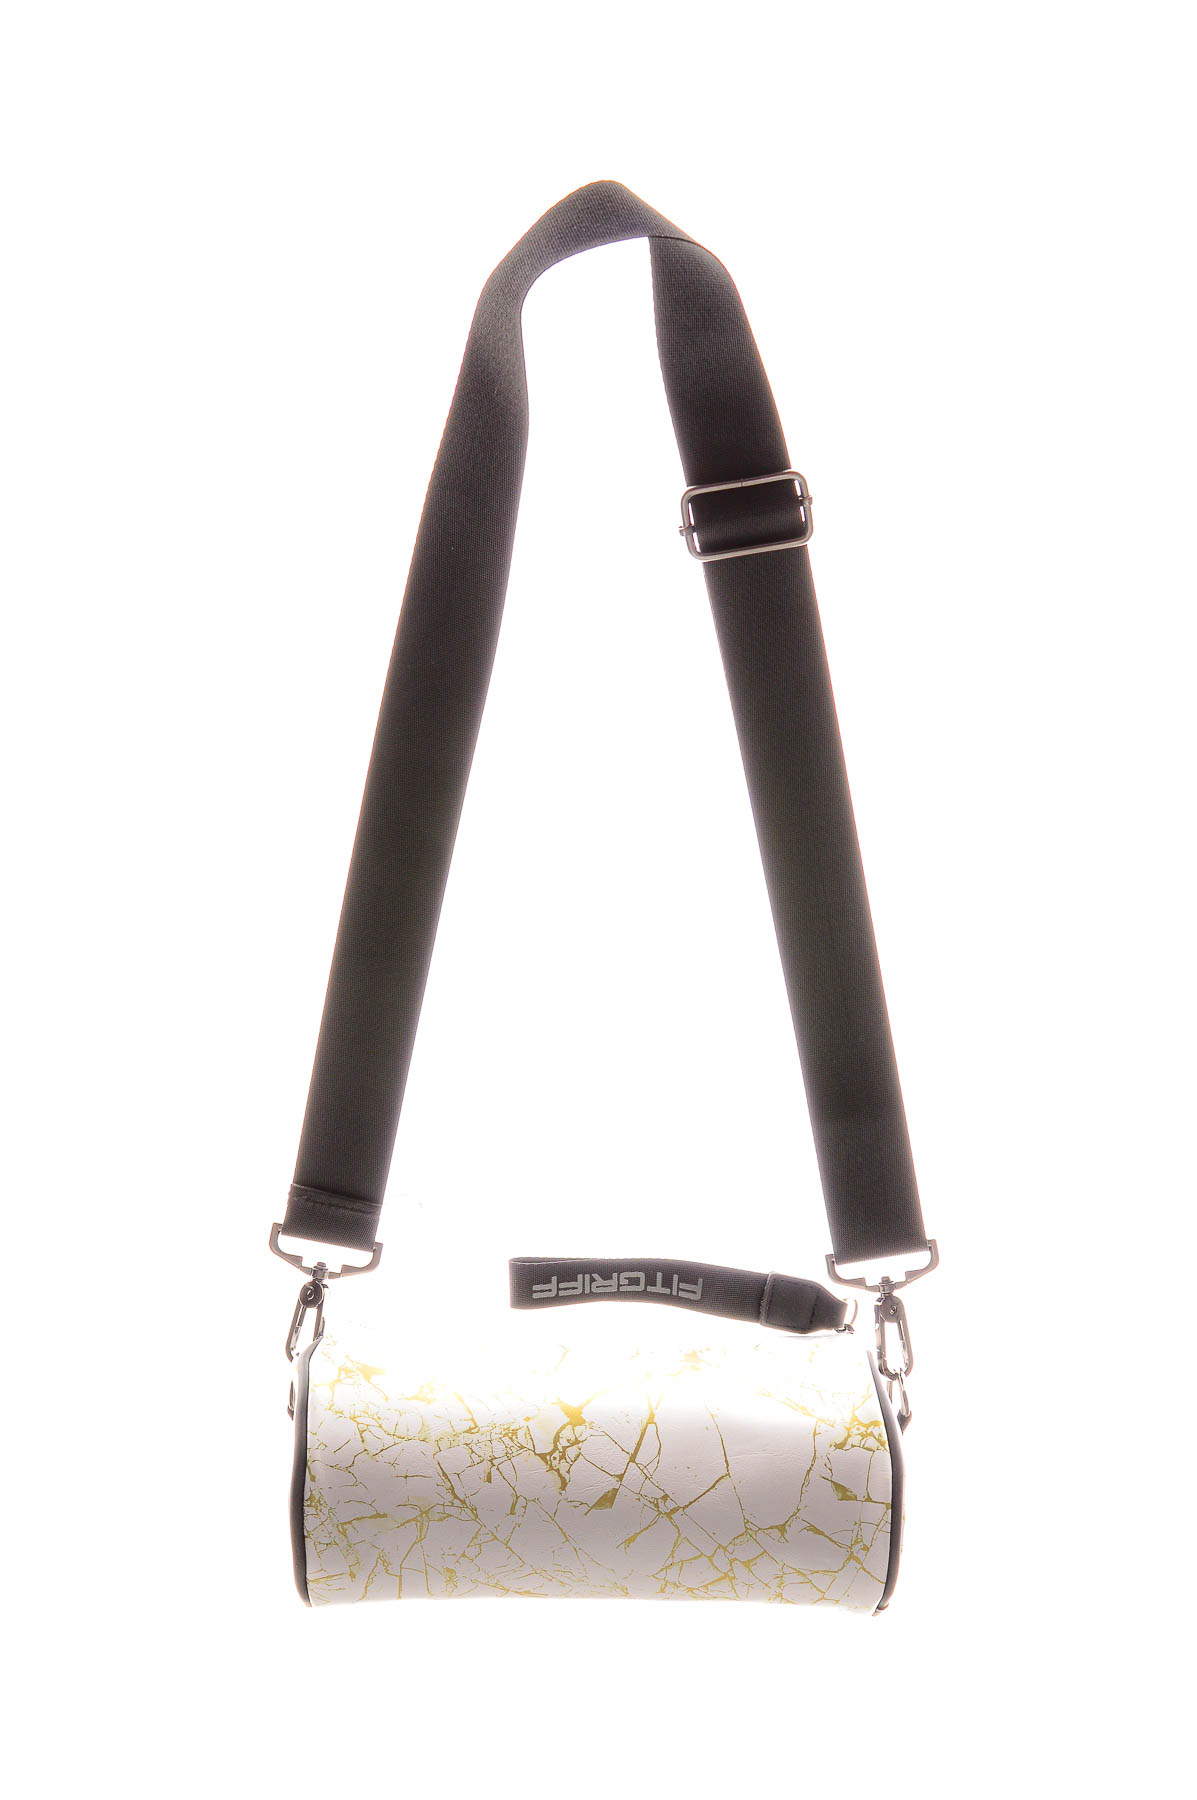 Women's bag - Fitgriff - 1